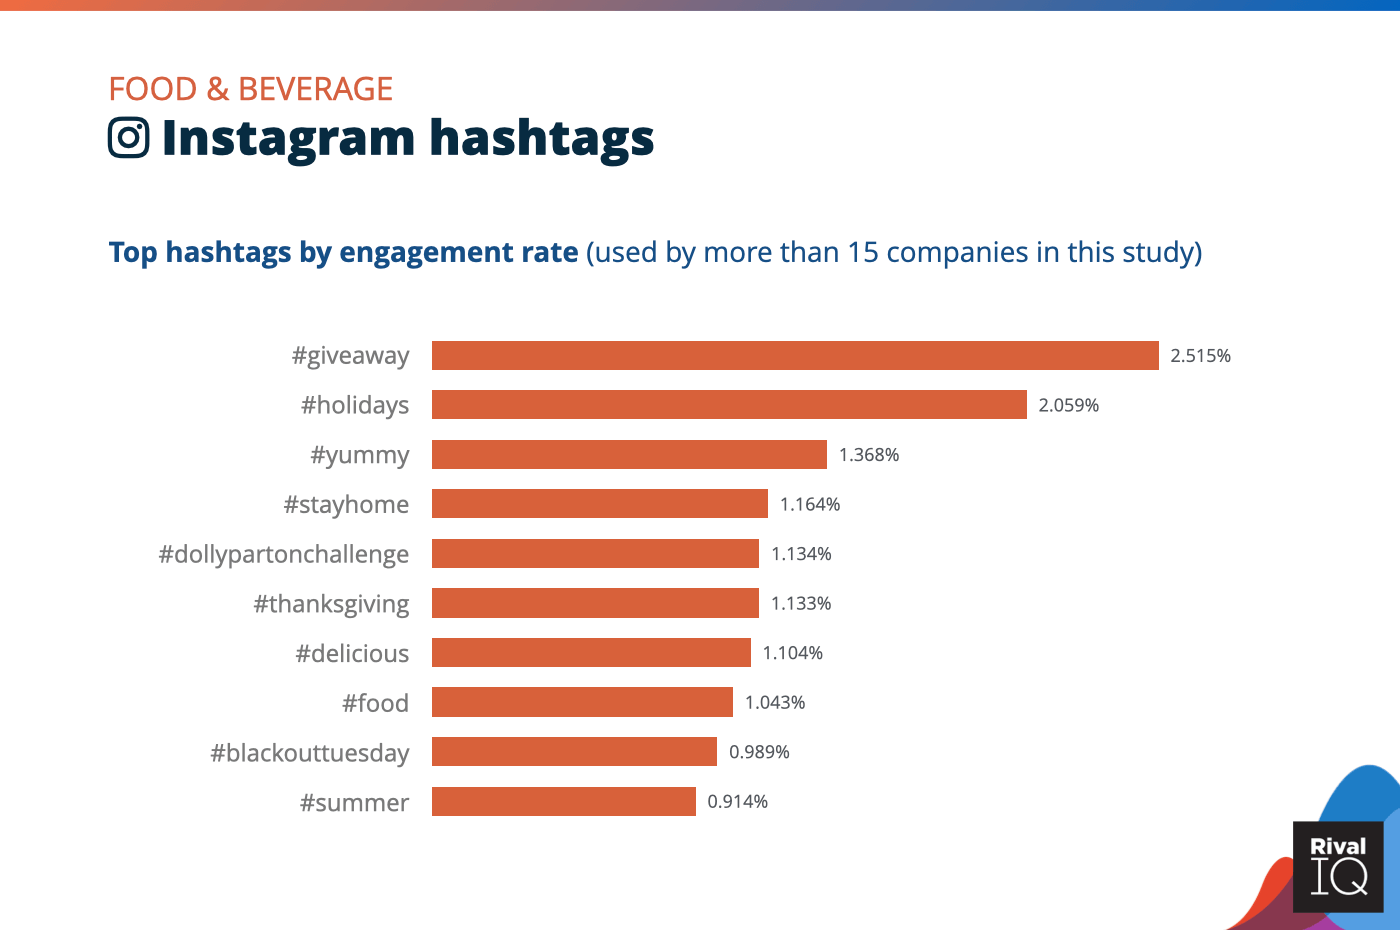 Chart of Top Instagram hashtags by engagement rate, Food & Beverage